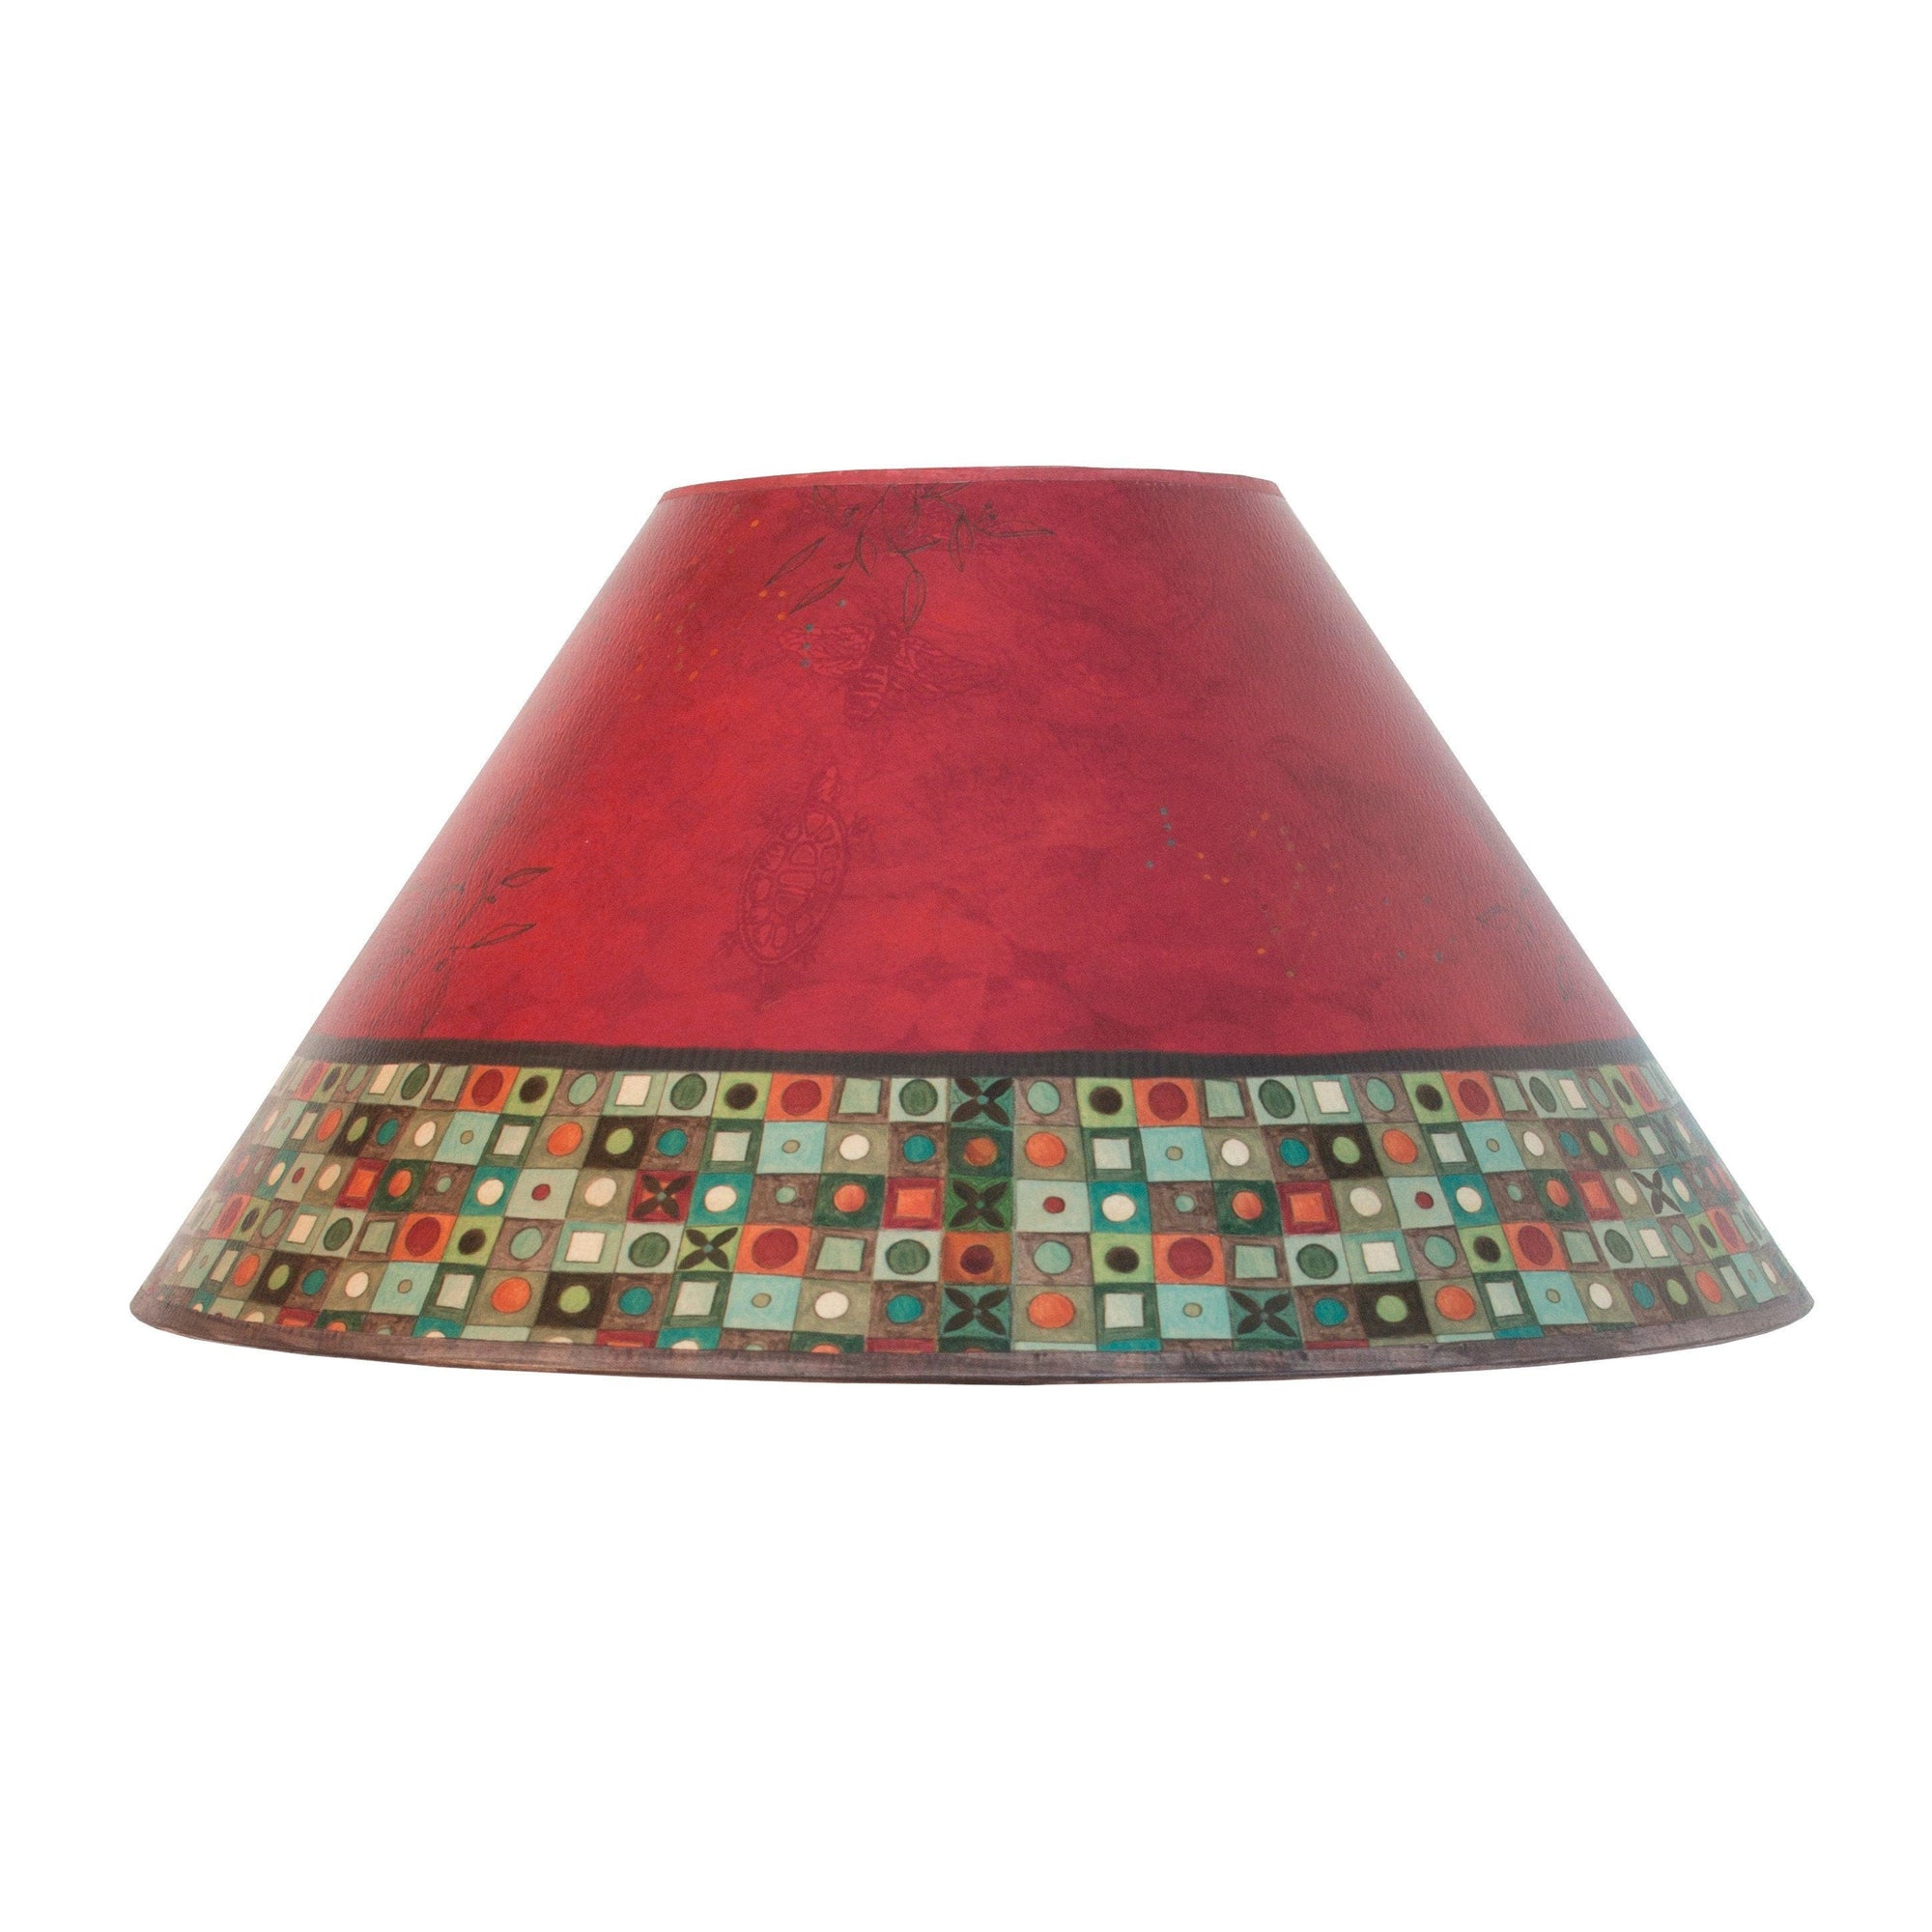 Janna Ugone & Co Lamp Shades Large Conical Lamp Shade in Red Mosaic